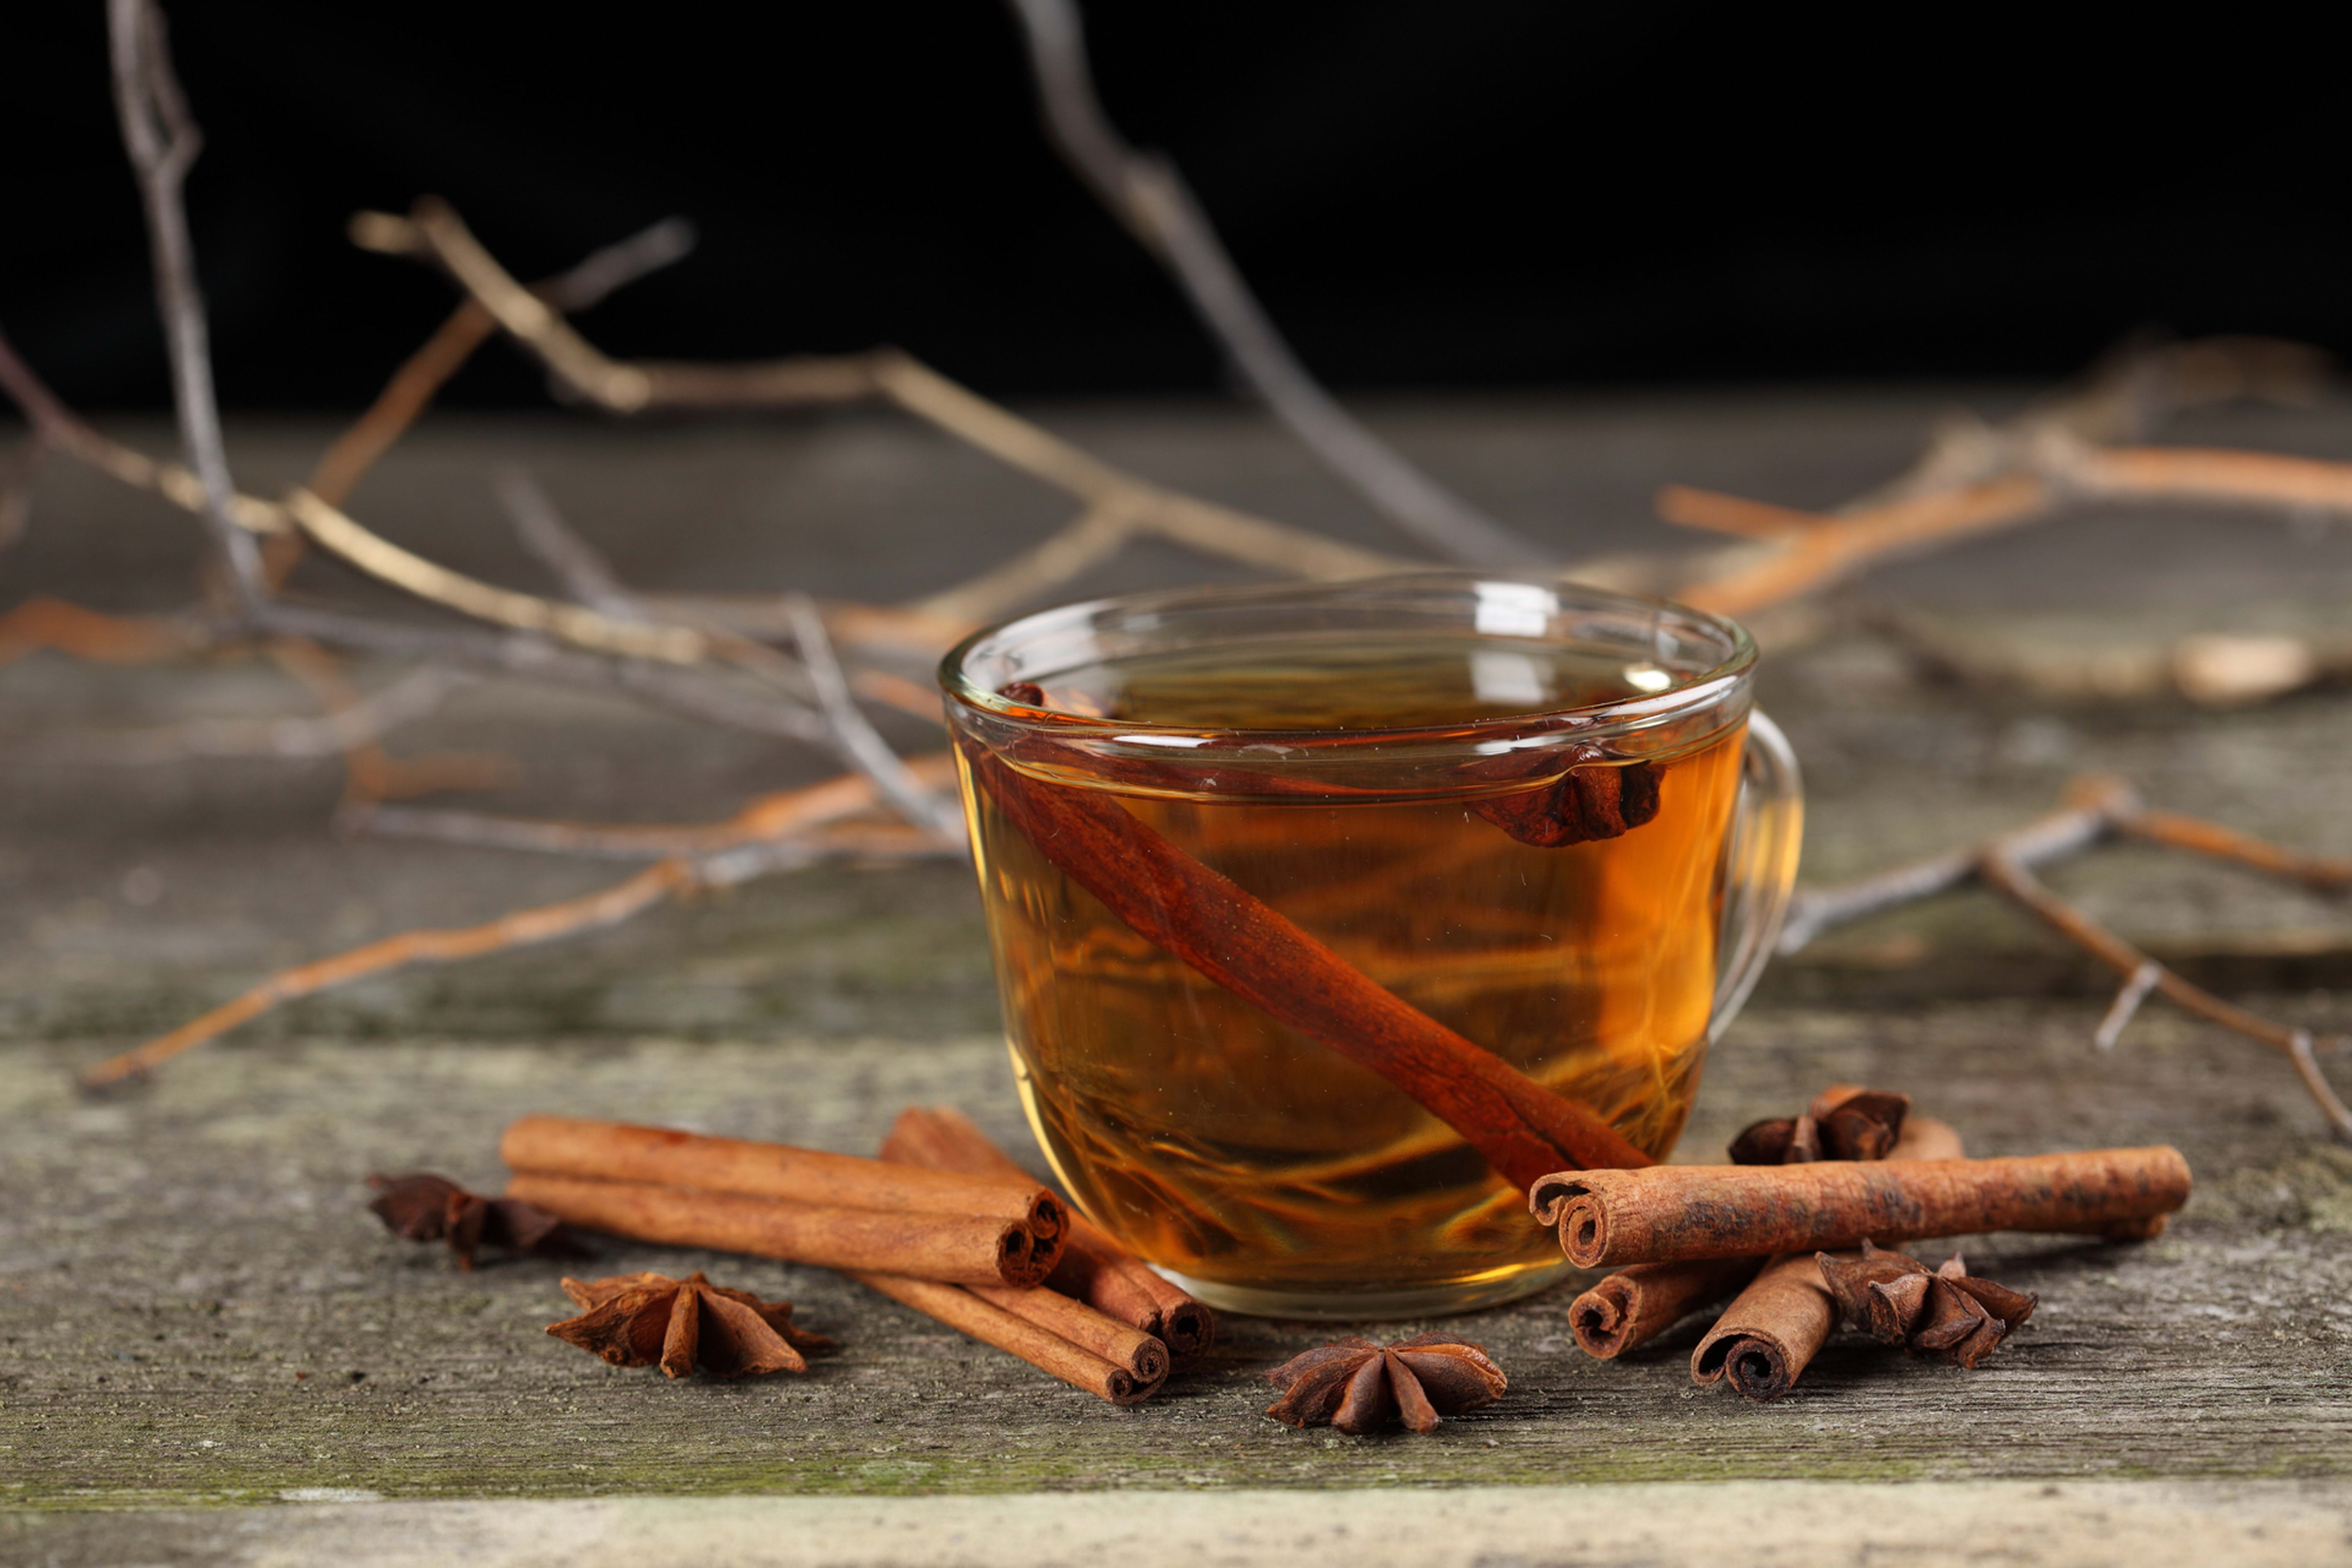 127226 download wallpaper food, cinnamon, cup, tea screensavers and pictures for free